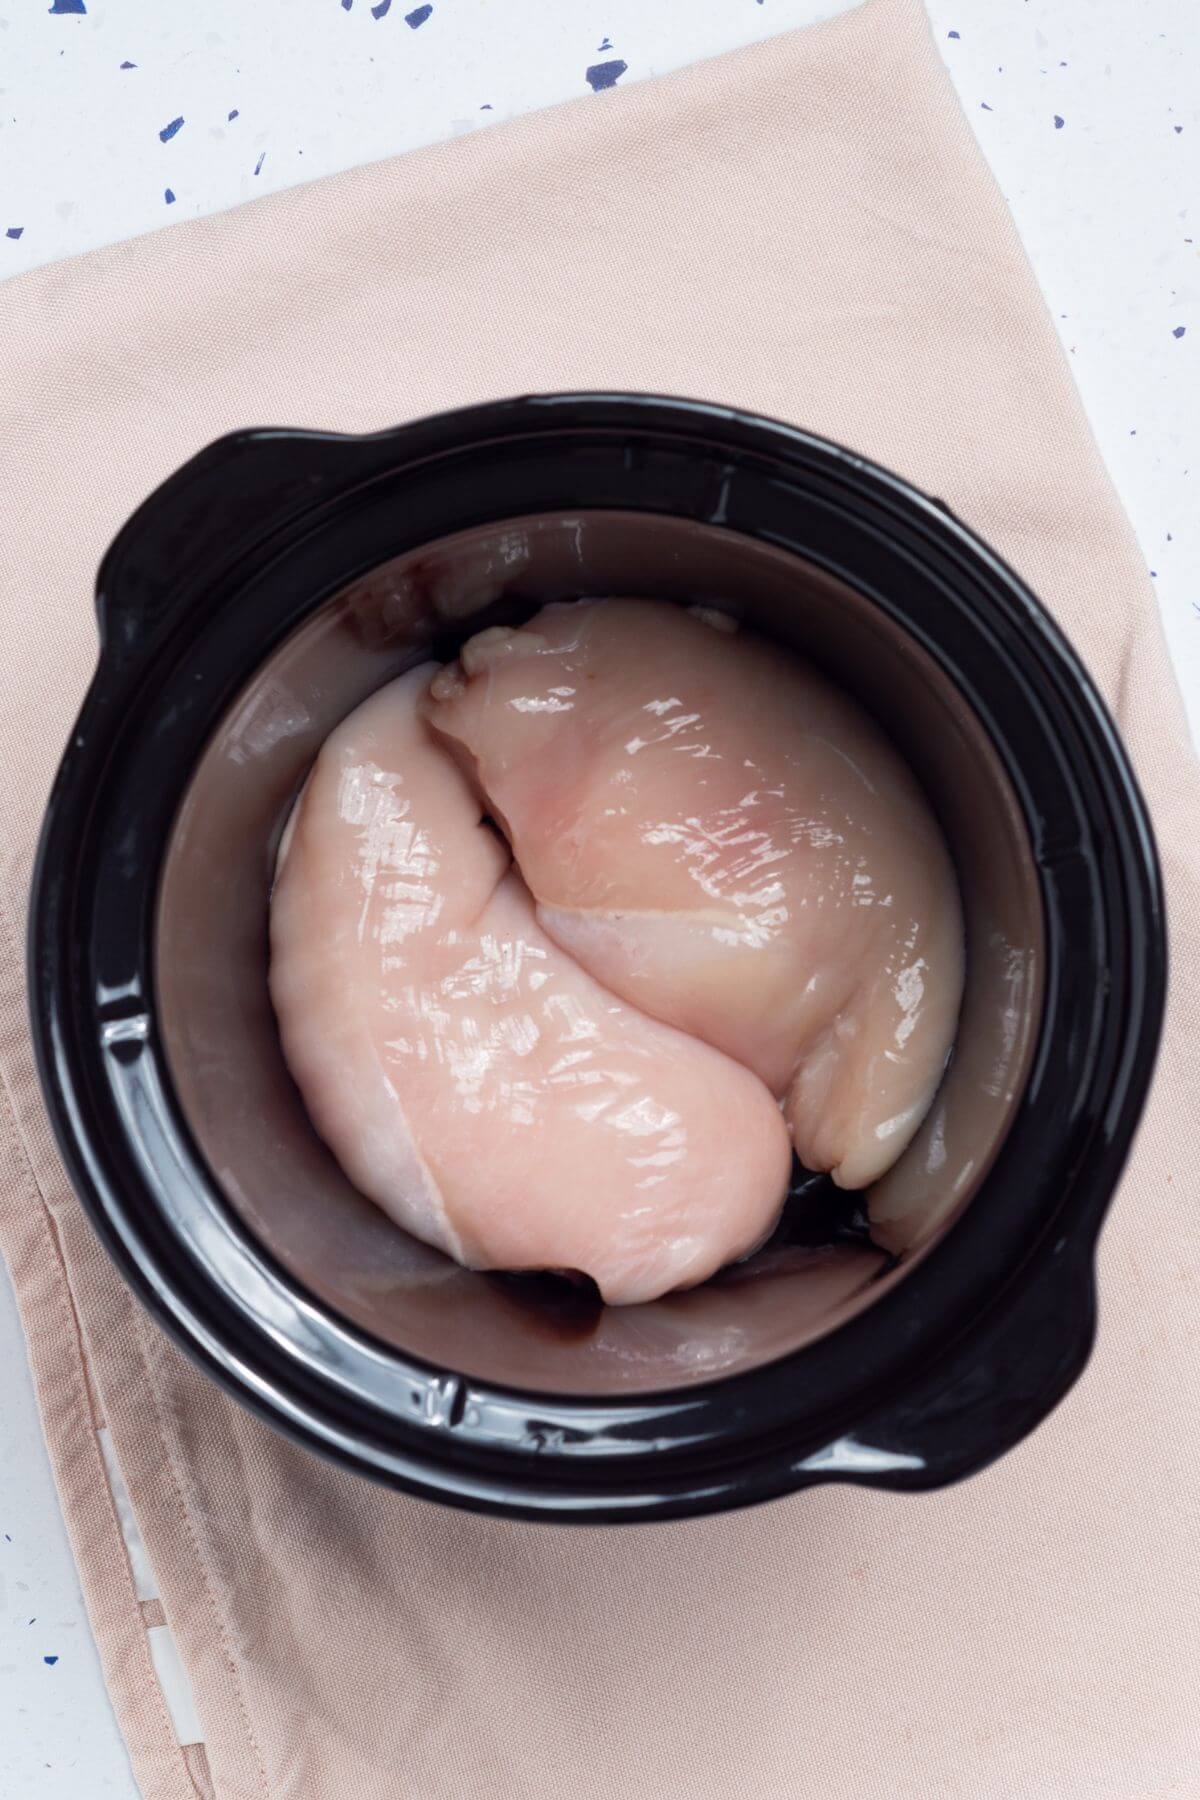 Chicken breasts in a slow cooker.